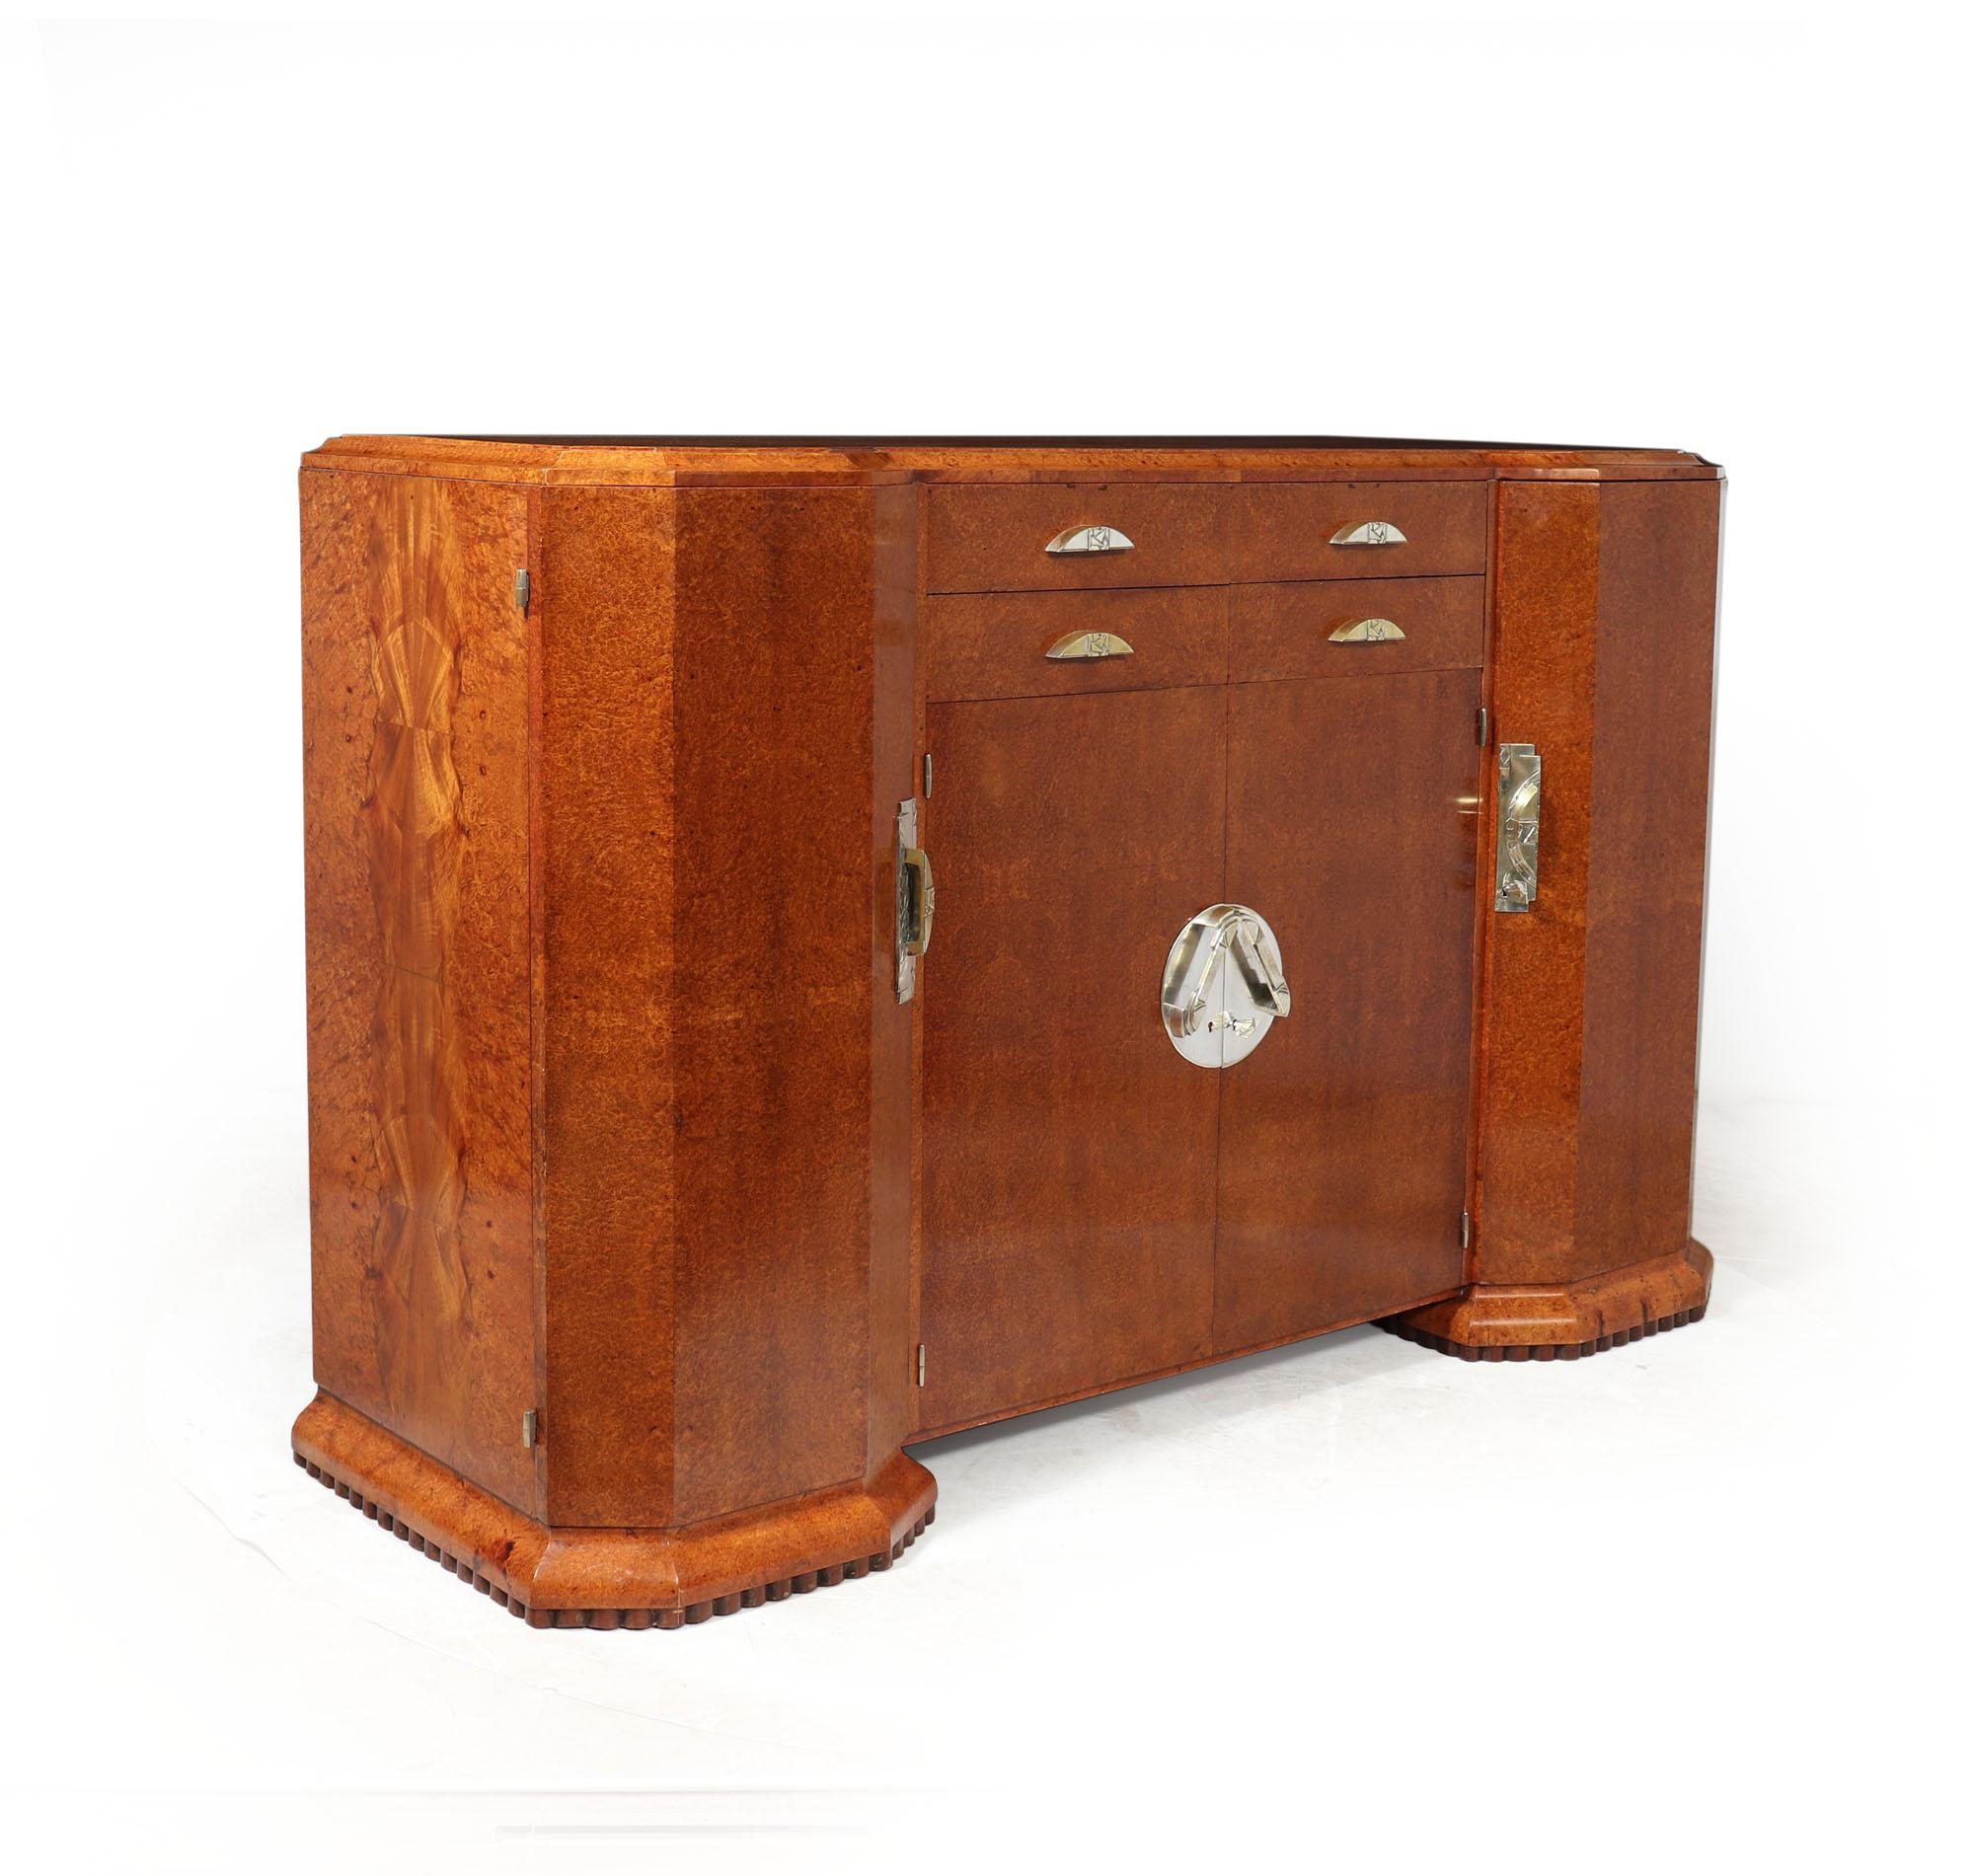 FRENCH ART DECO SIDEBOARD IN AMBOYNA
This exquisite French Art Deco Sideboard, crafted in 1925, is a true rarity of unparalleled quality. Constructed from the finest amboyna veneers and elegantly lined with satinwood, it exudes sophistication and